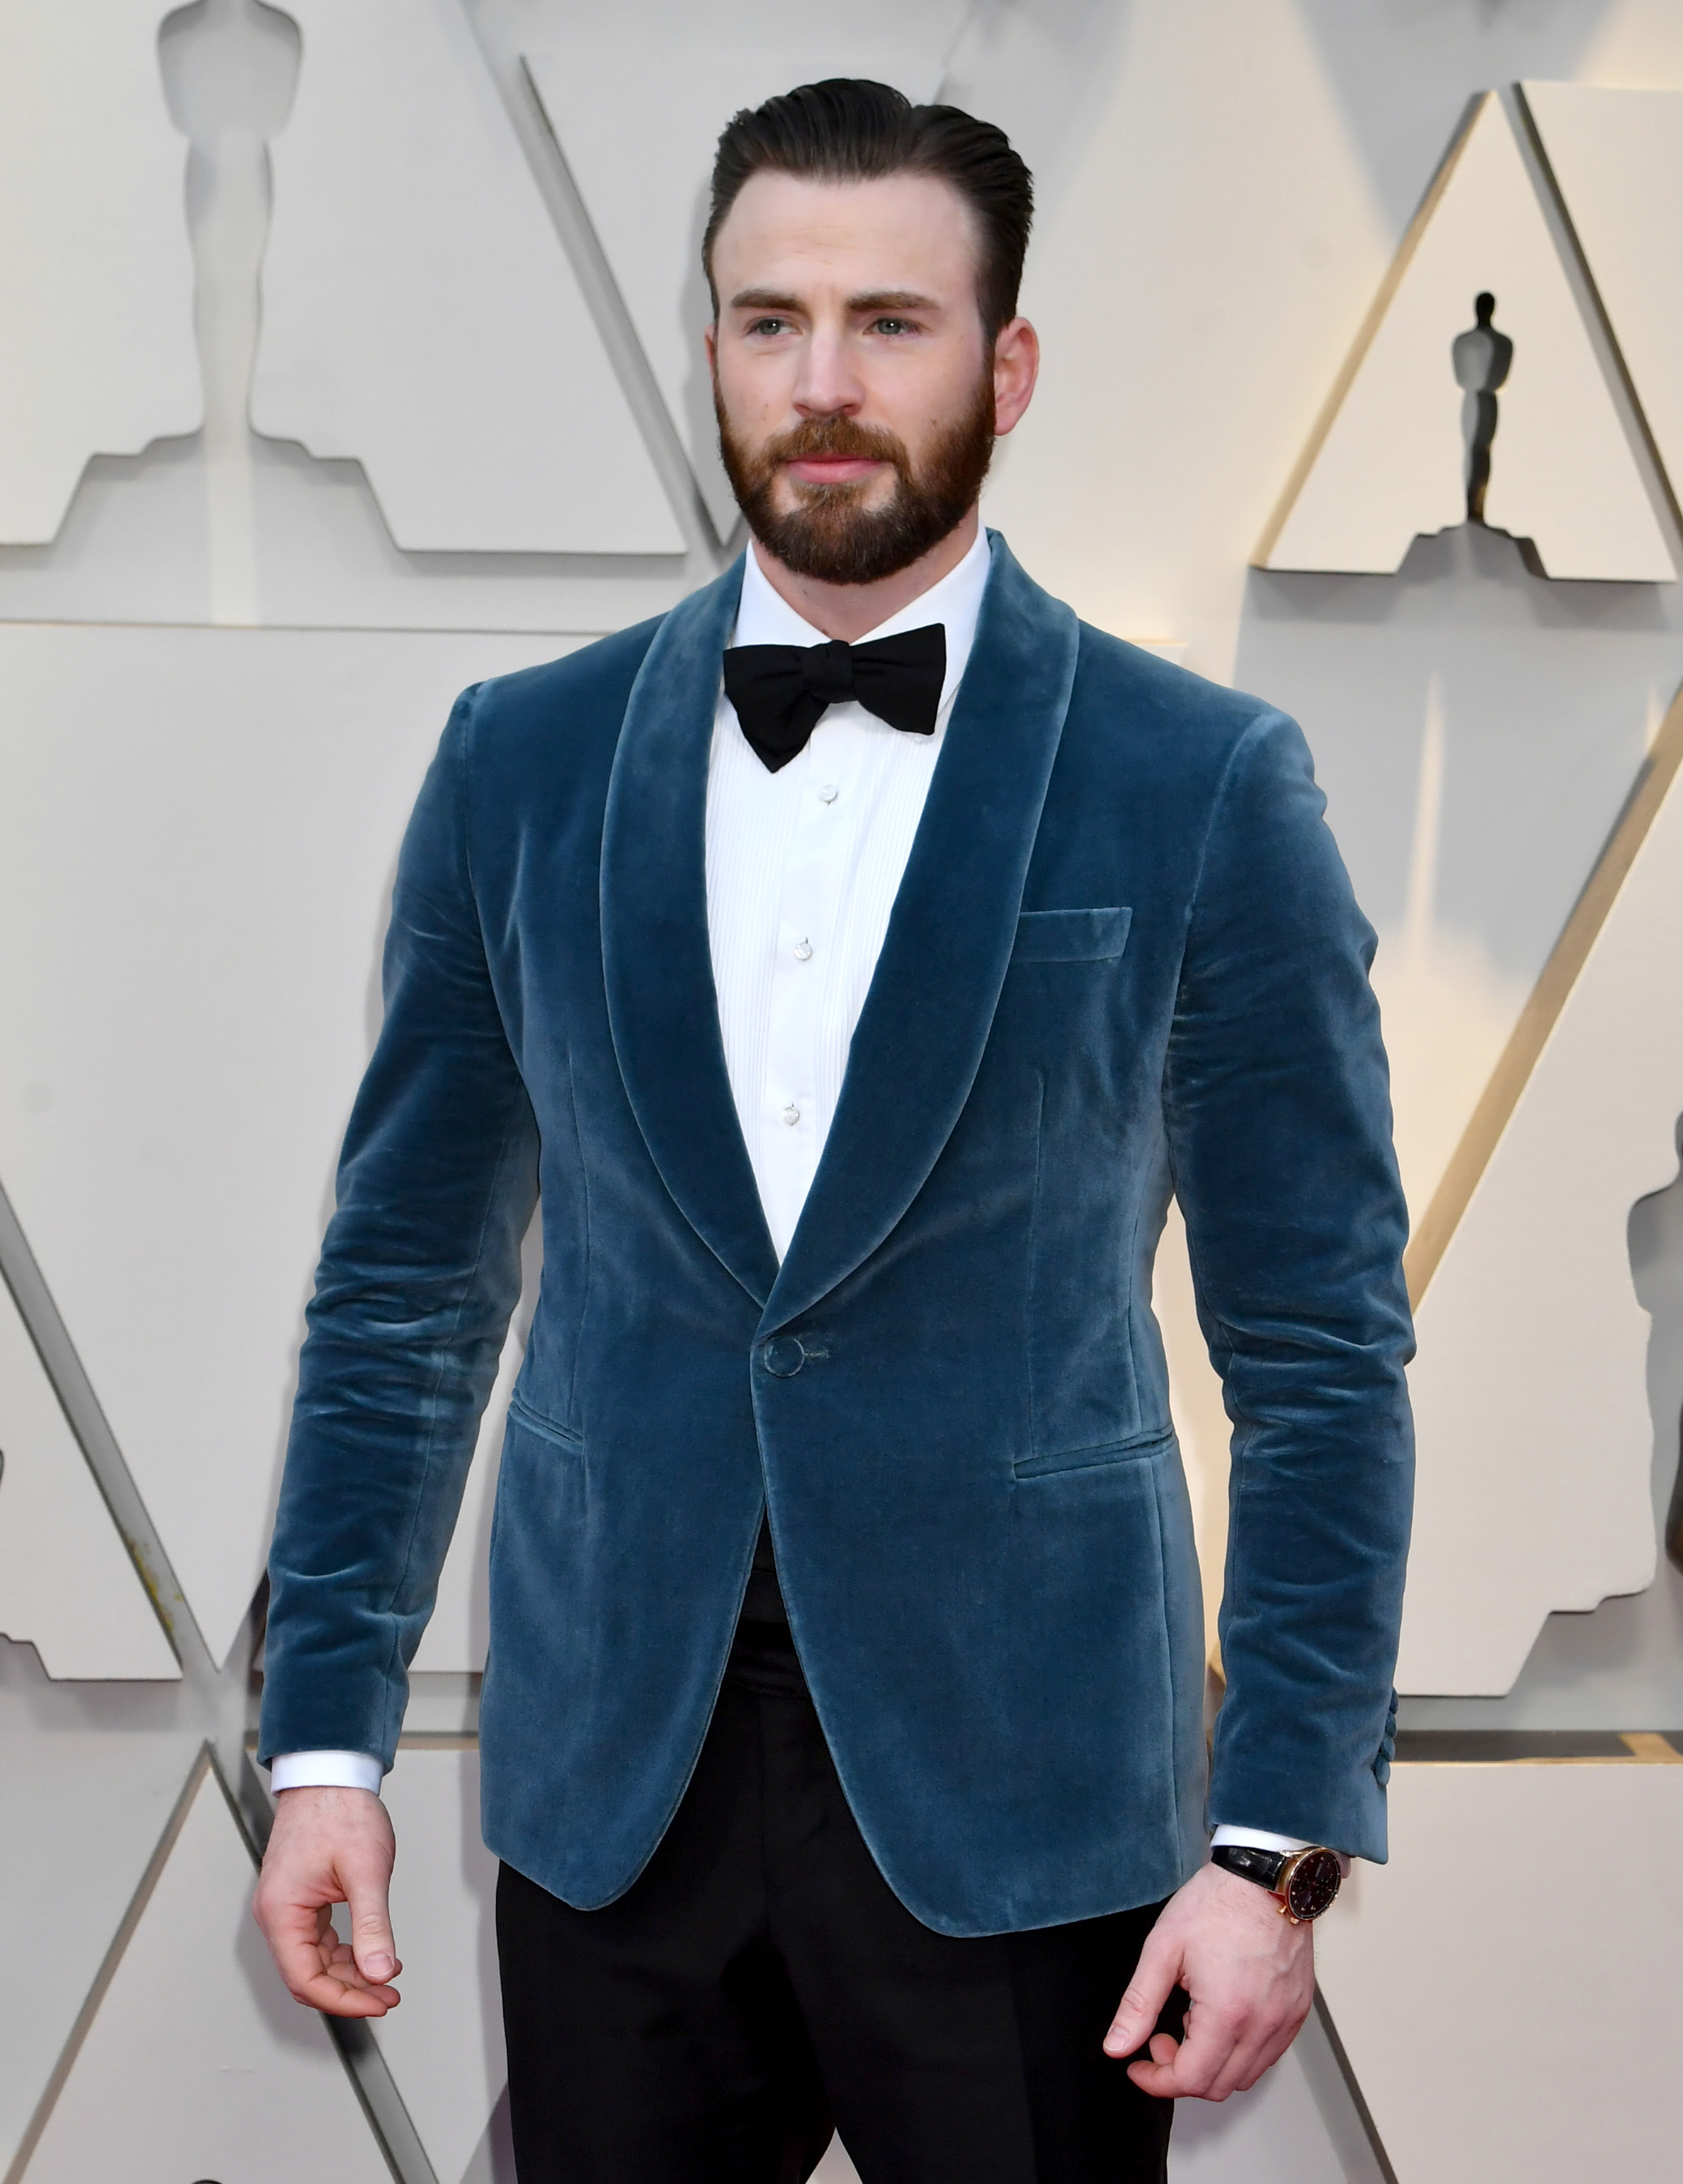 Chris Evans wearing the Portugieser Chronograph (IW371482)